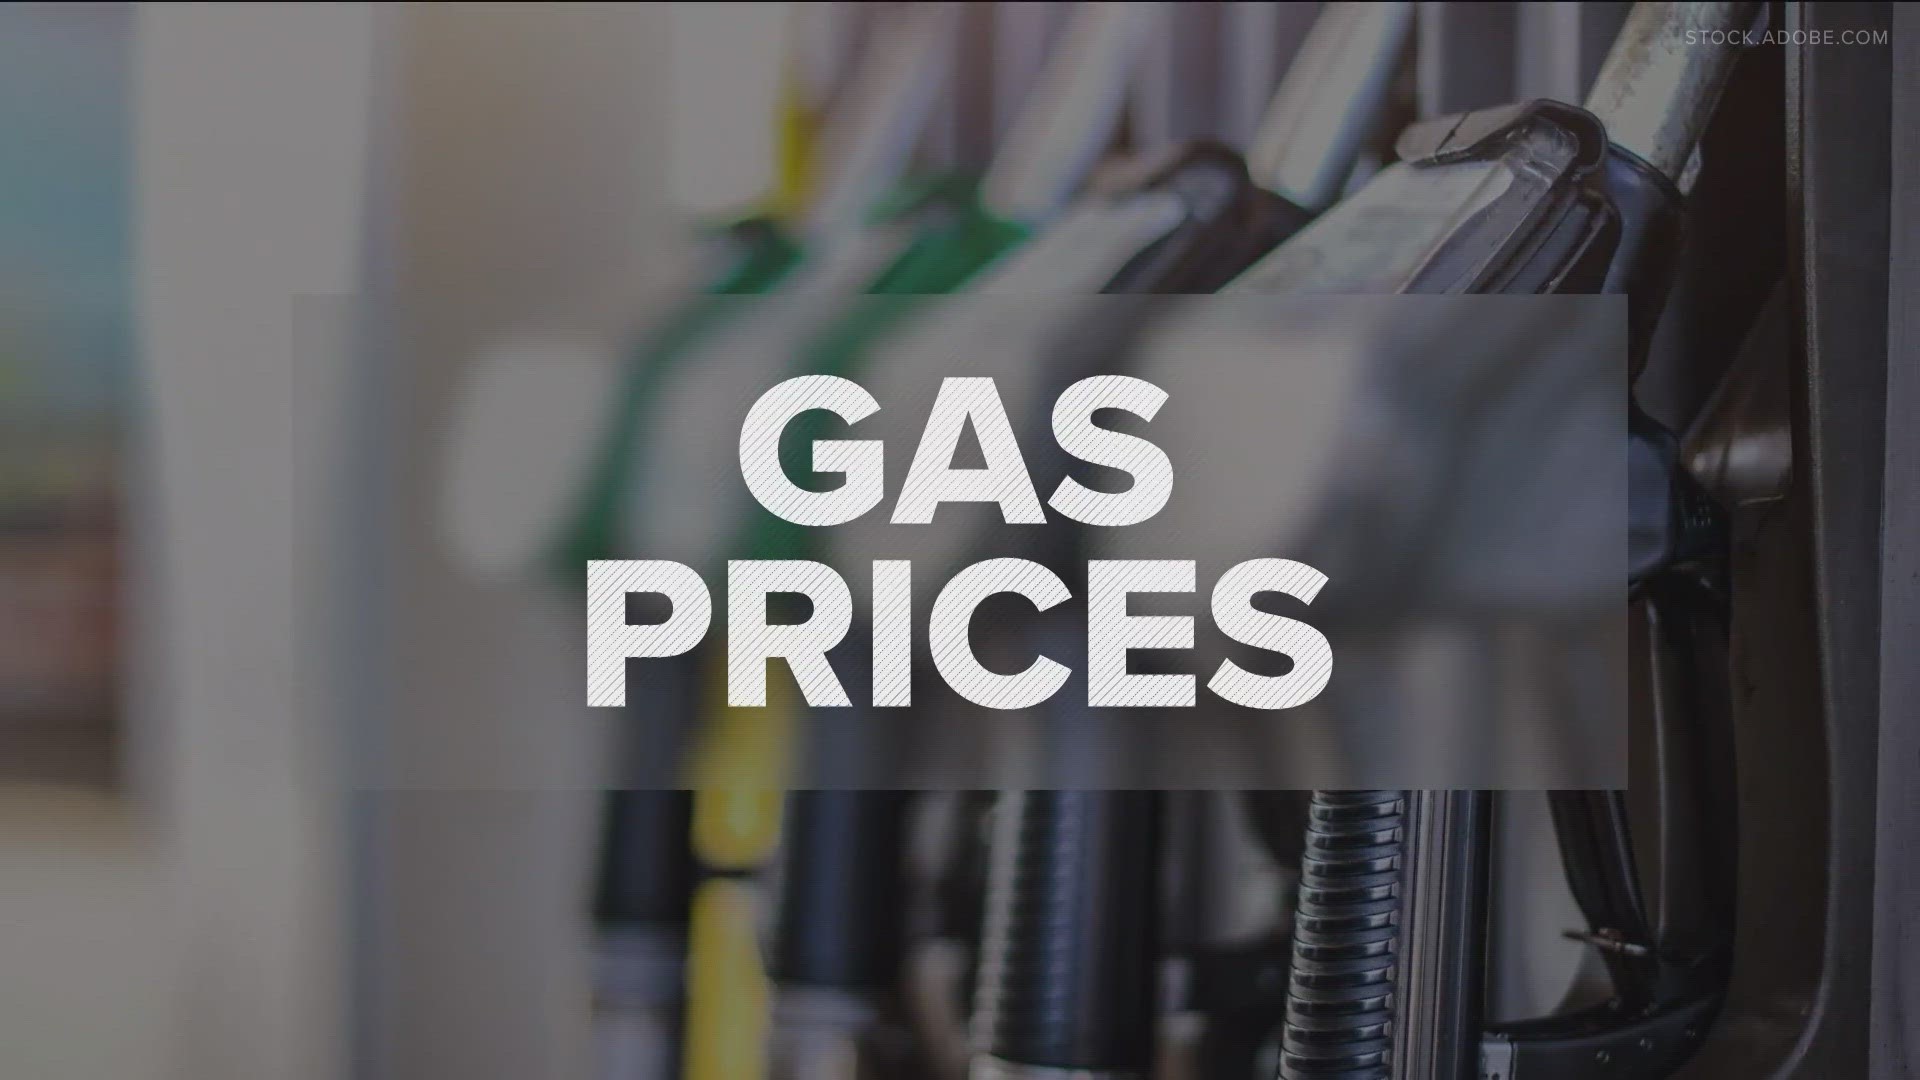 The average price for a gallon of gas locally is 13 cents lower than a month ago and stands 51 cents lower than a year ago, according to a GasBuddy survey.